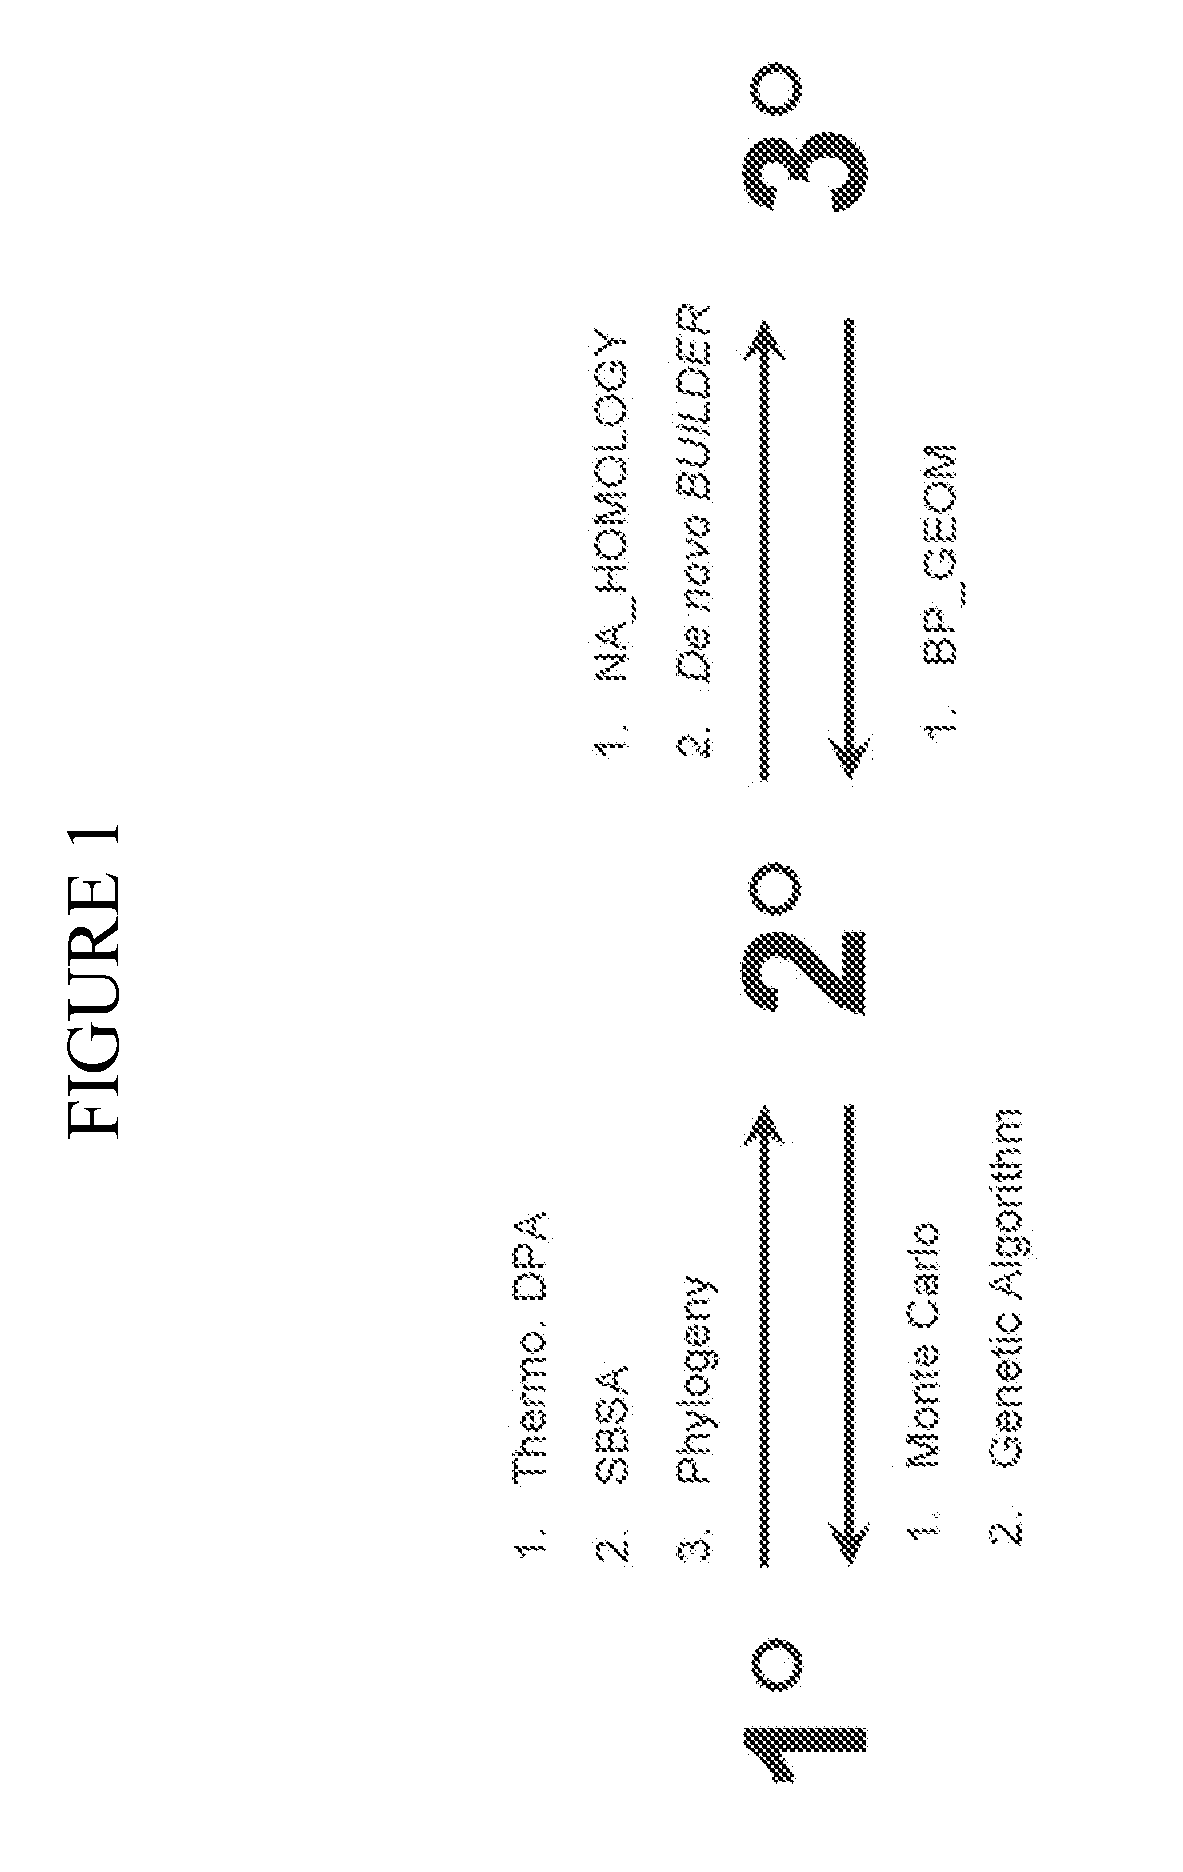 System and methods for three dimensional molecular structural analysis